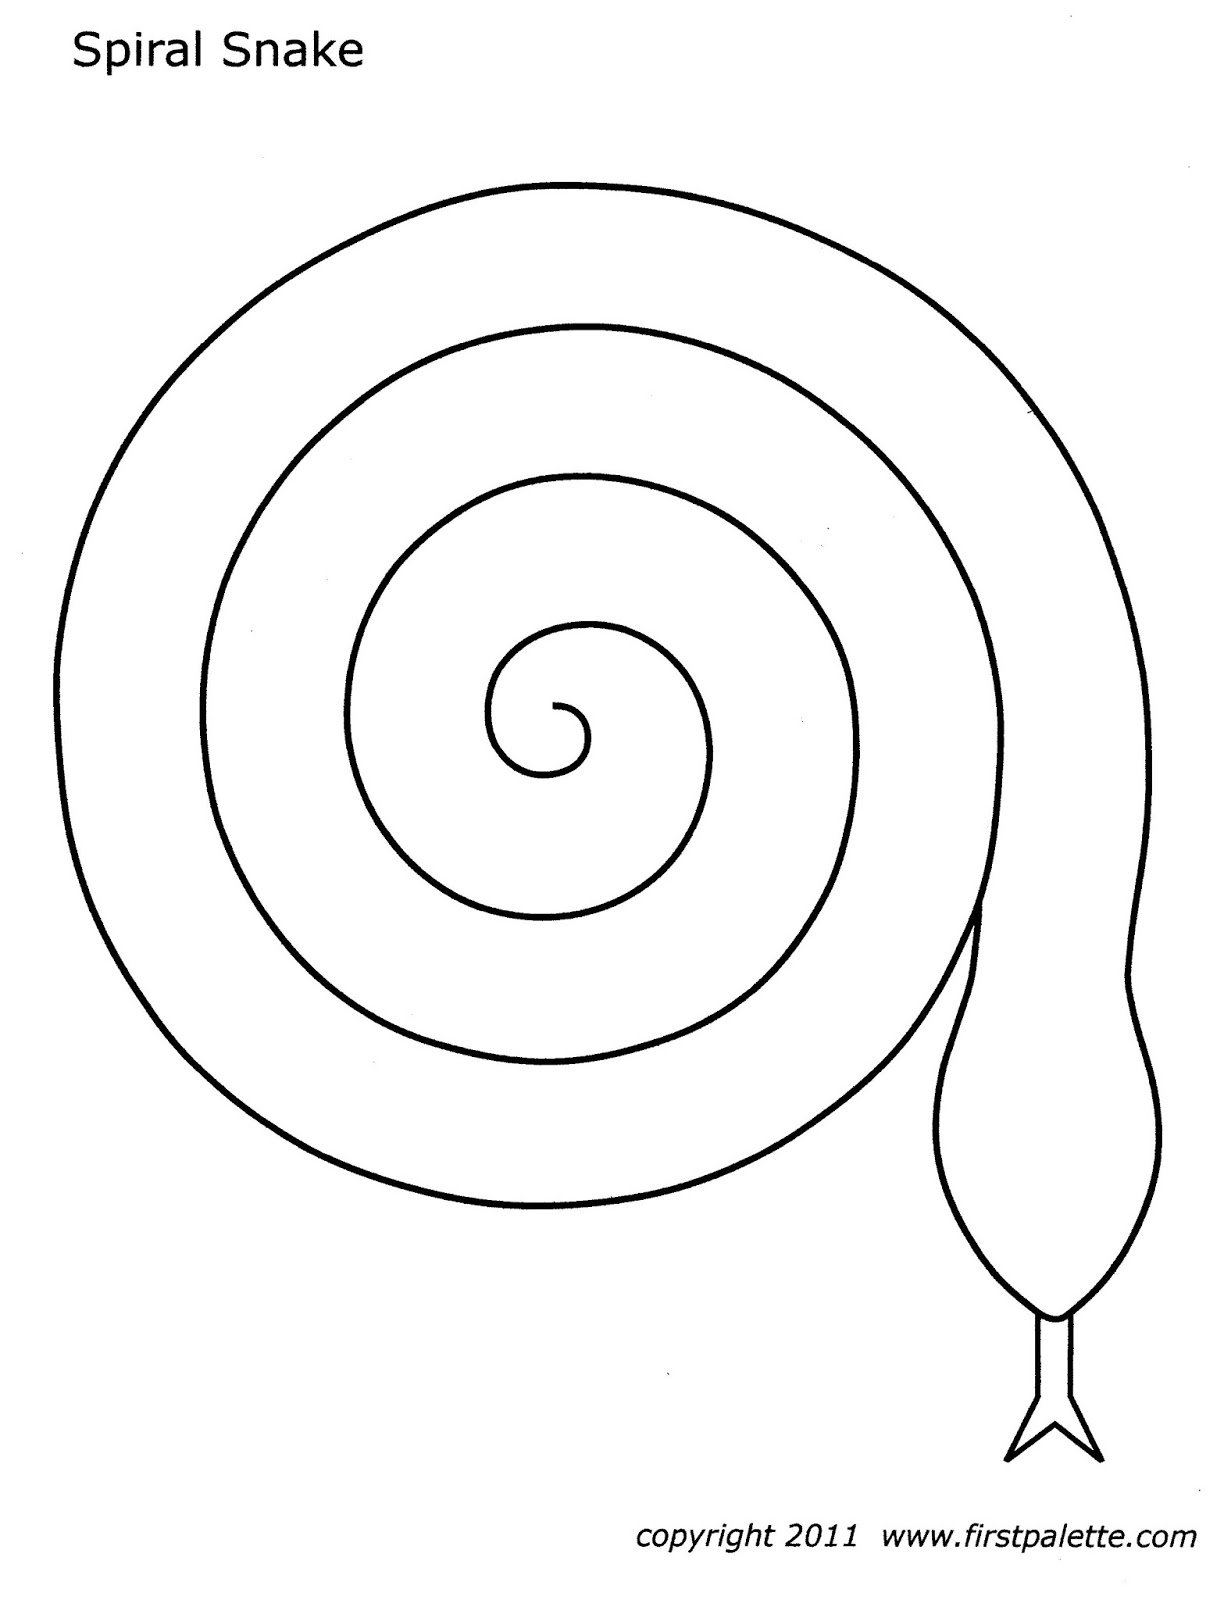 Amazing spiral coloring page